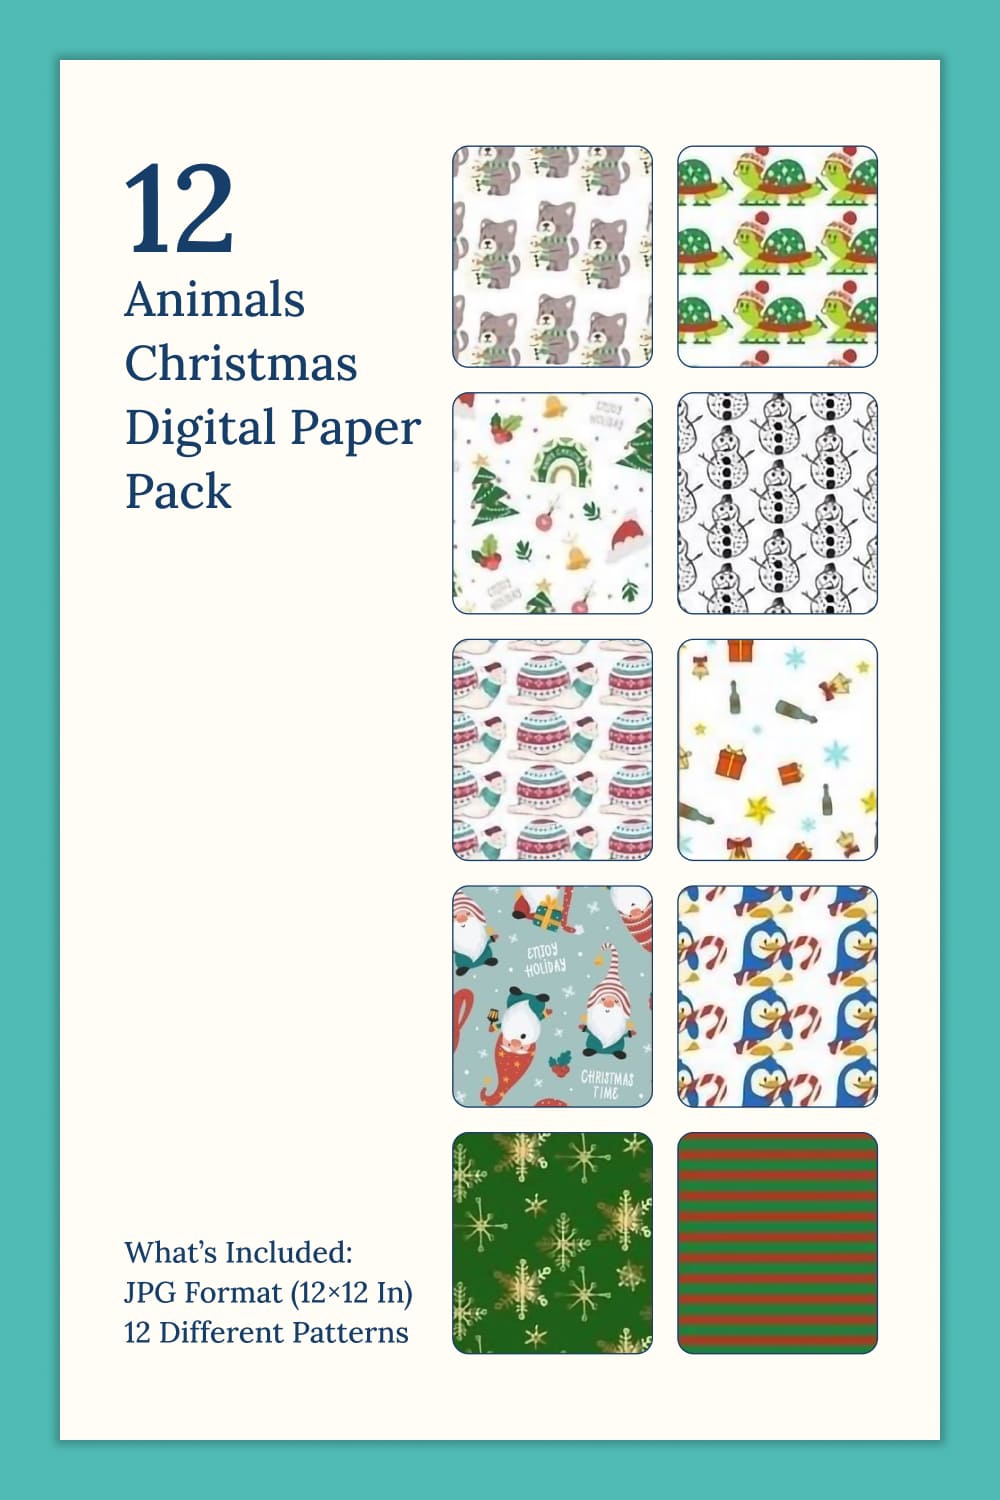 Christmas patterns with trees, Christmas gnomes, penguins and more.